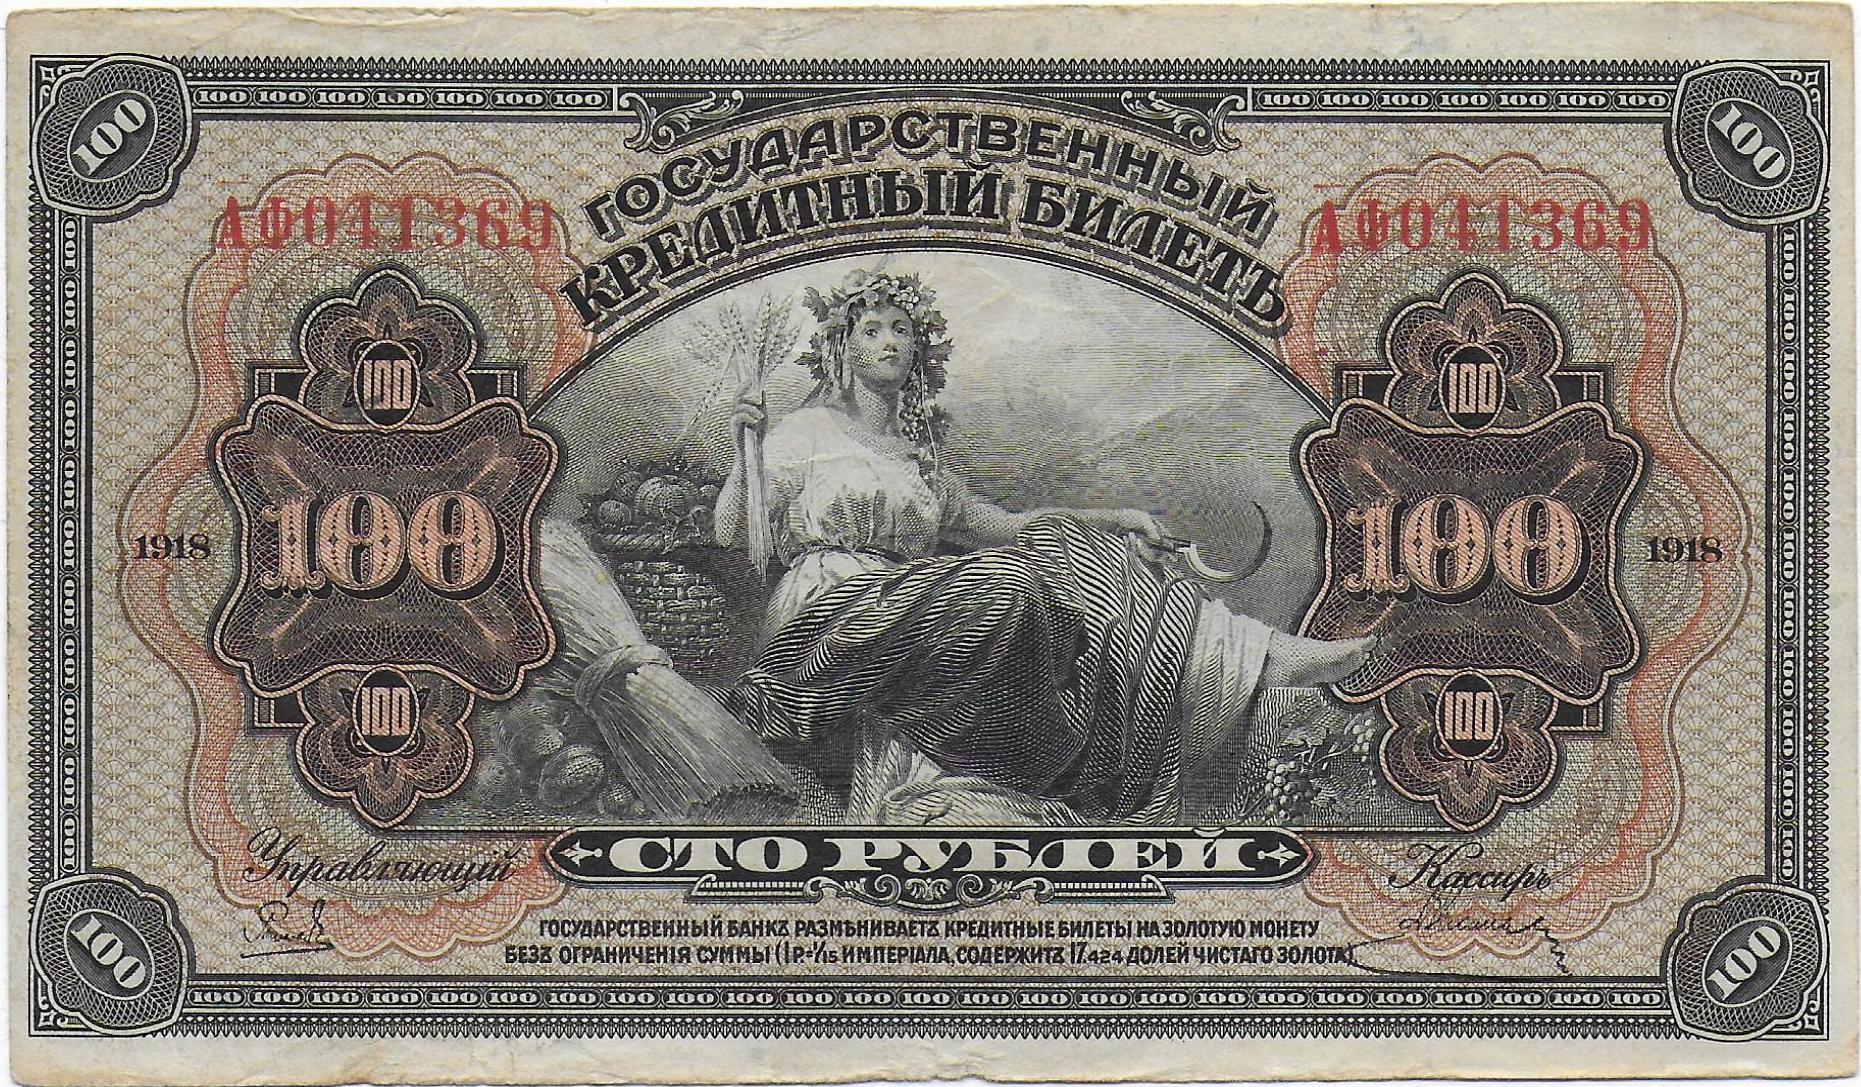 Russia East Siberia 100 Rubles 1918 front.jpg